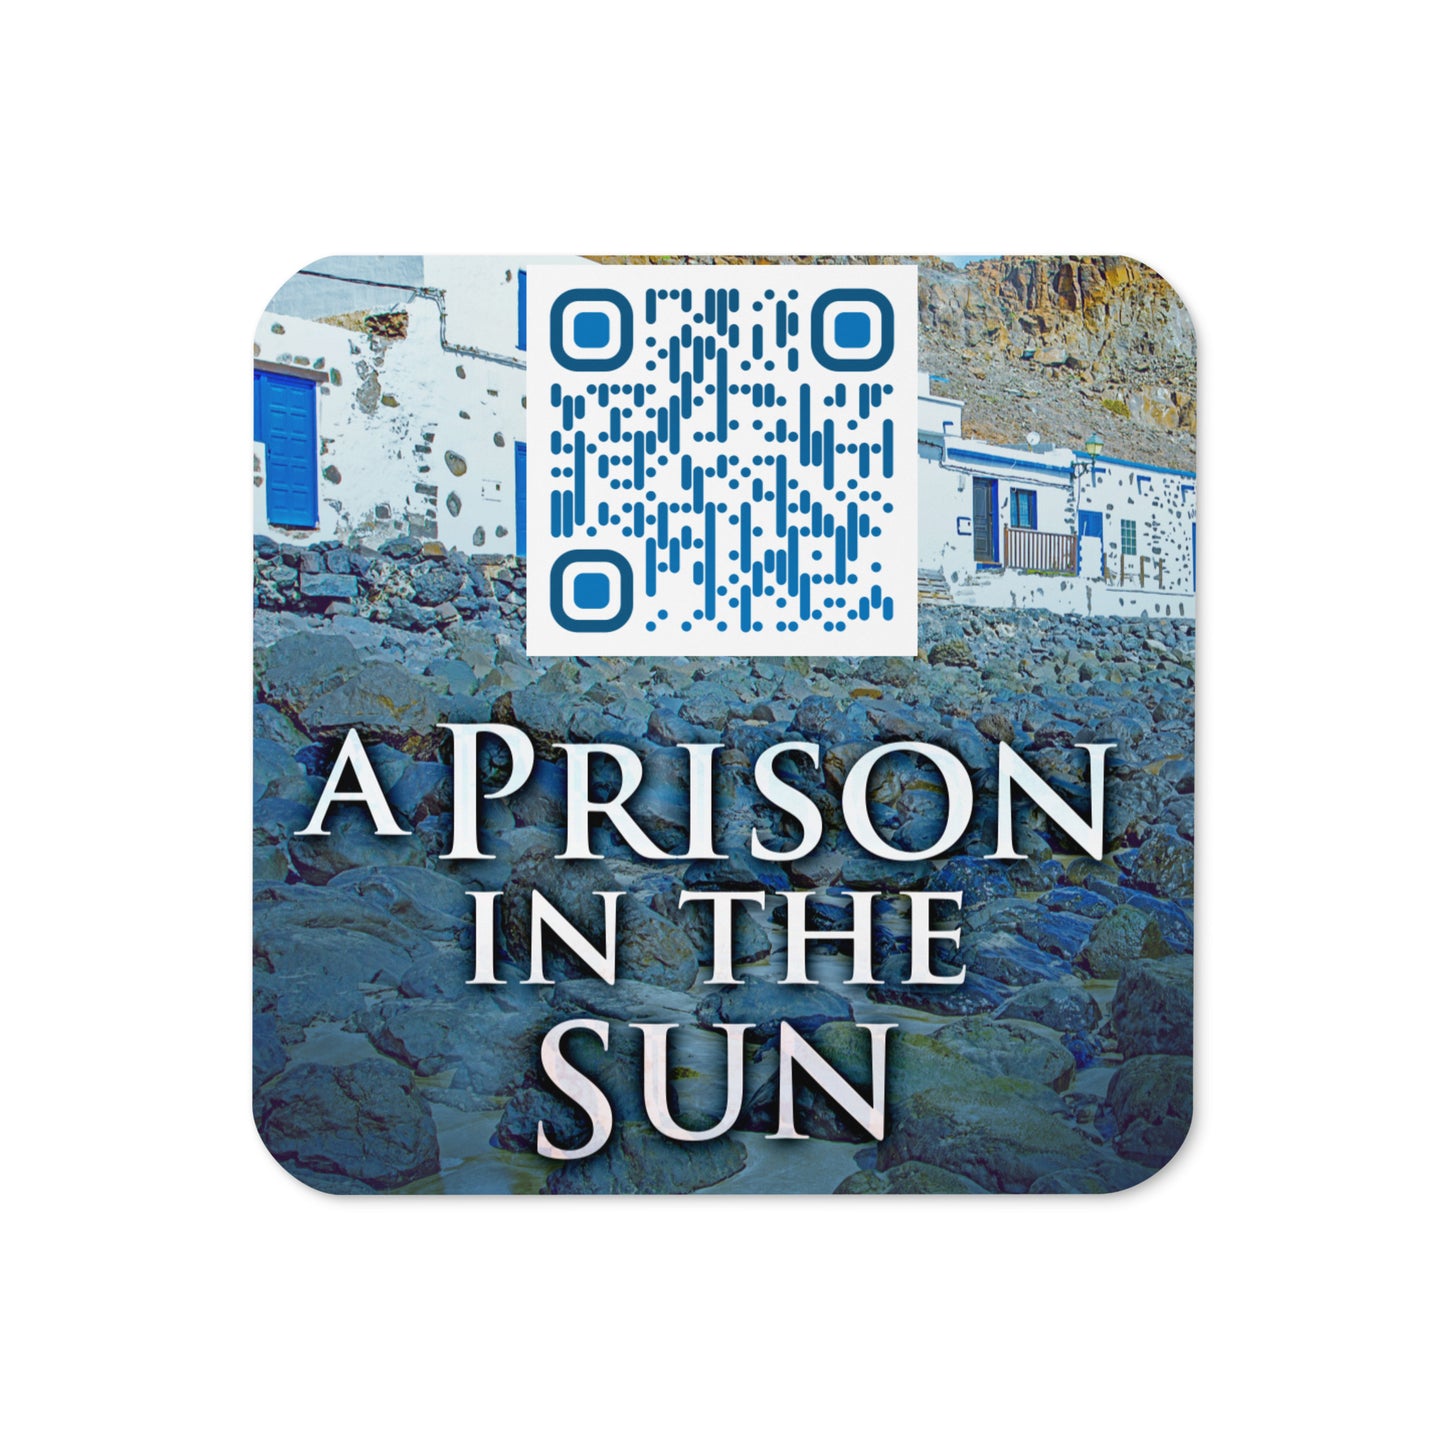 coaster with cover art from Isobel Blackthorn's book A Prison In The Sun